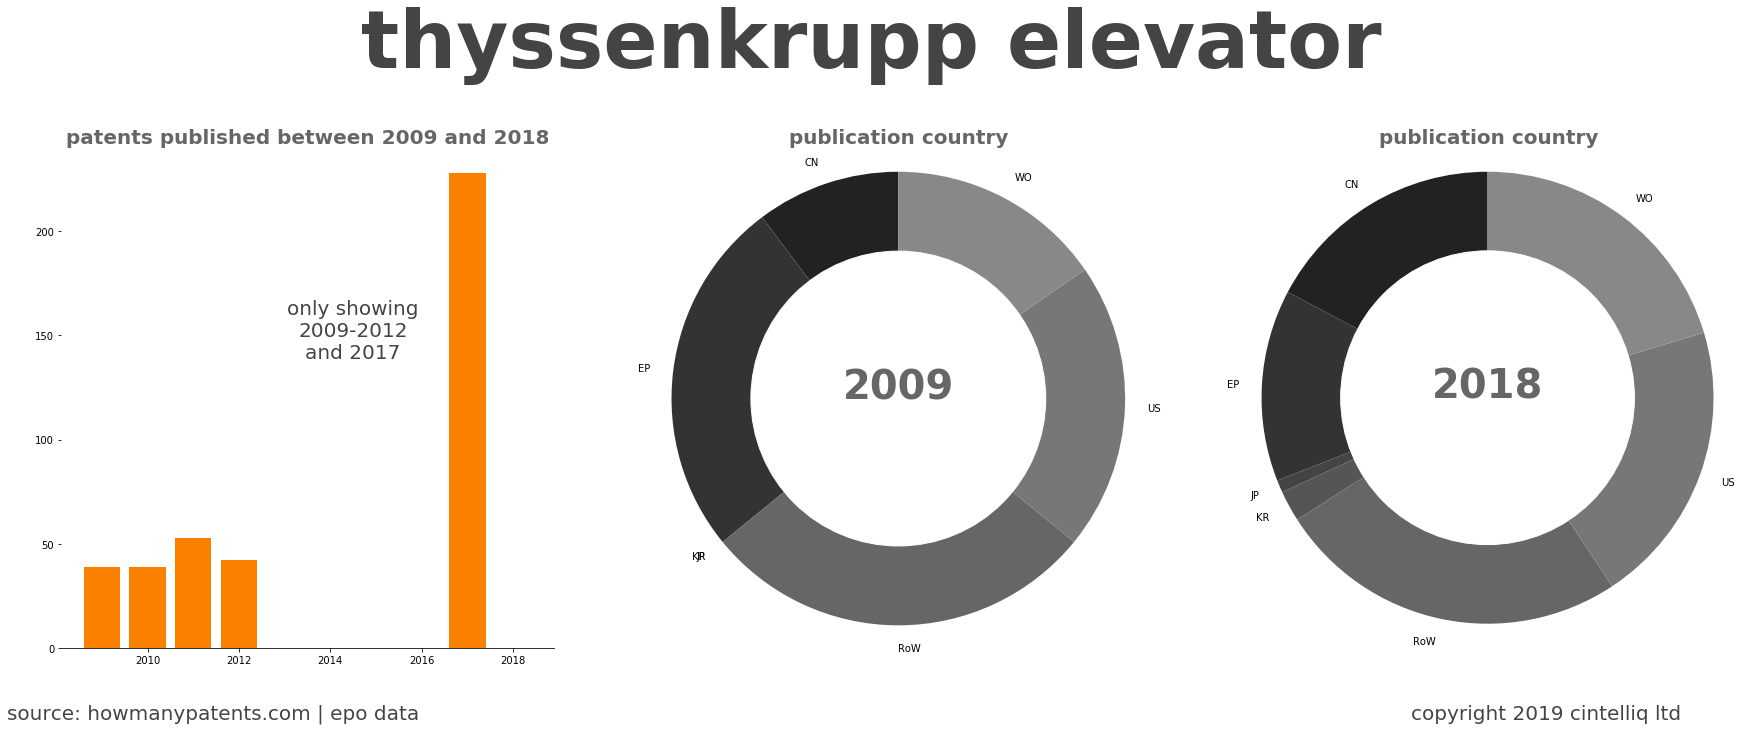 summary of patents for Thyssenkrupp Elevator